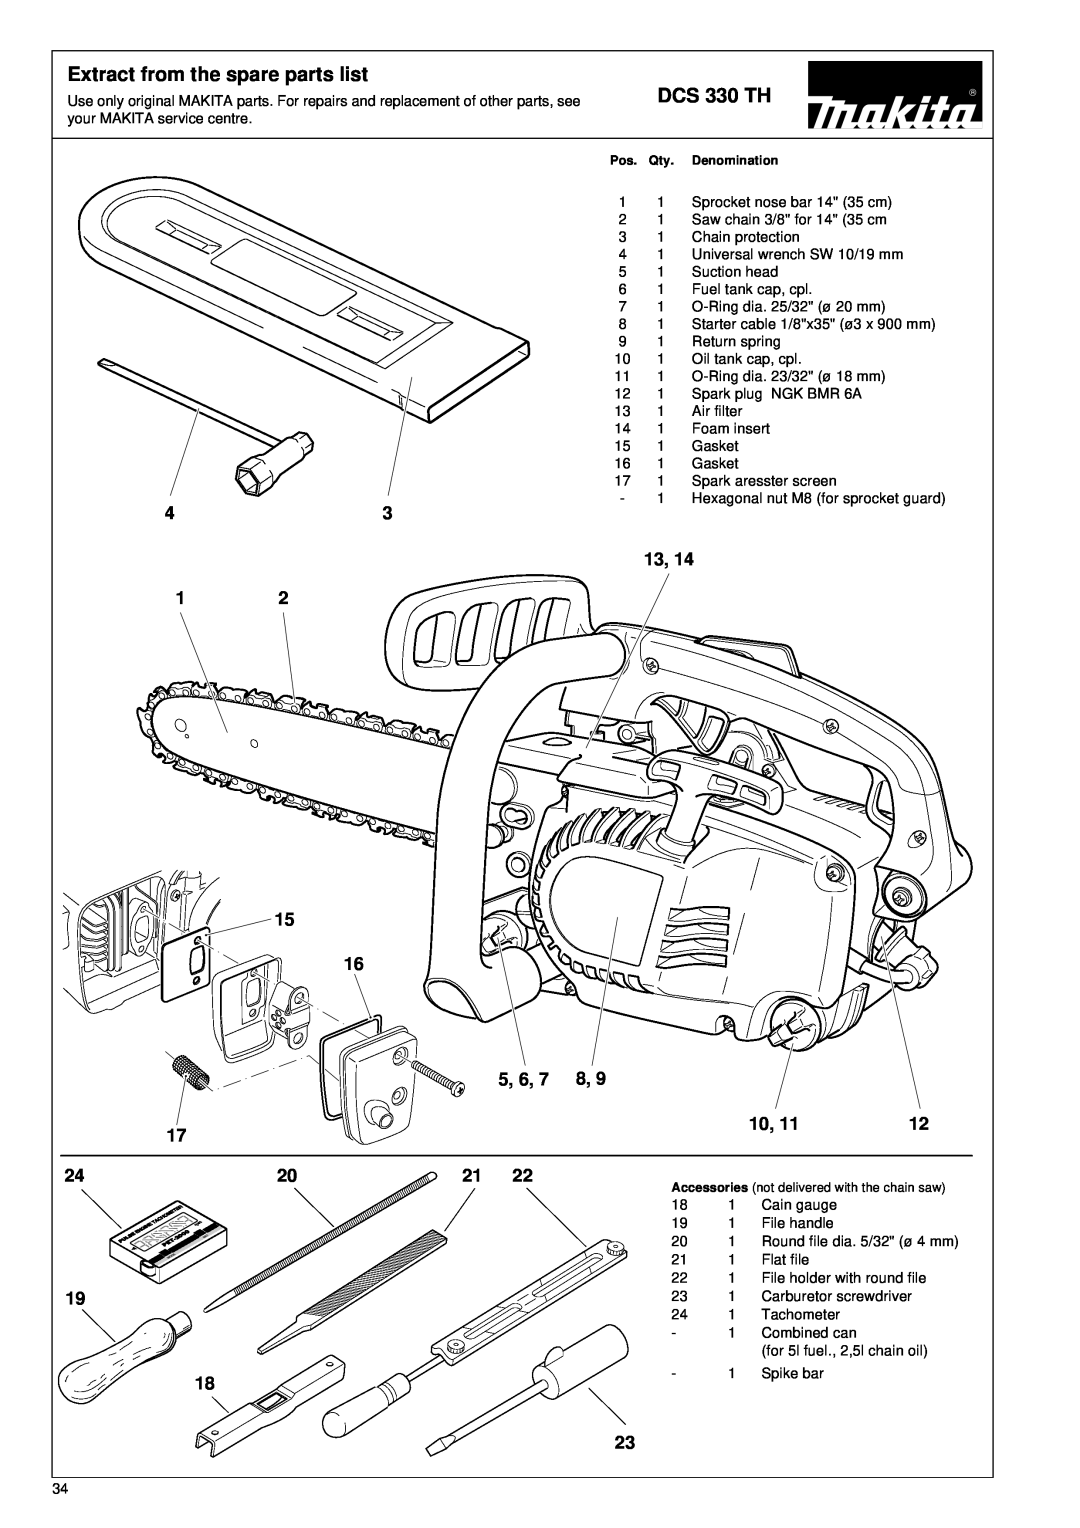 Makita DCS 330 TH instruction manual Extract from the spare parts list 